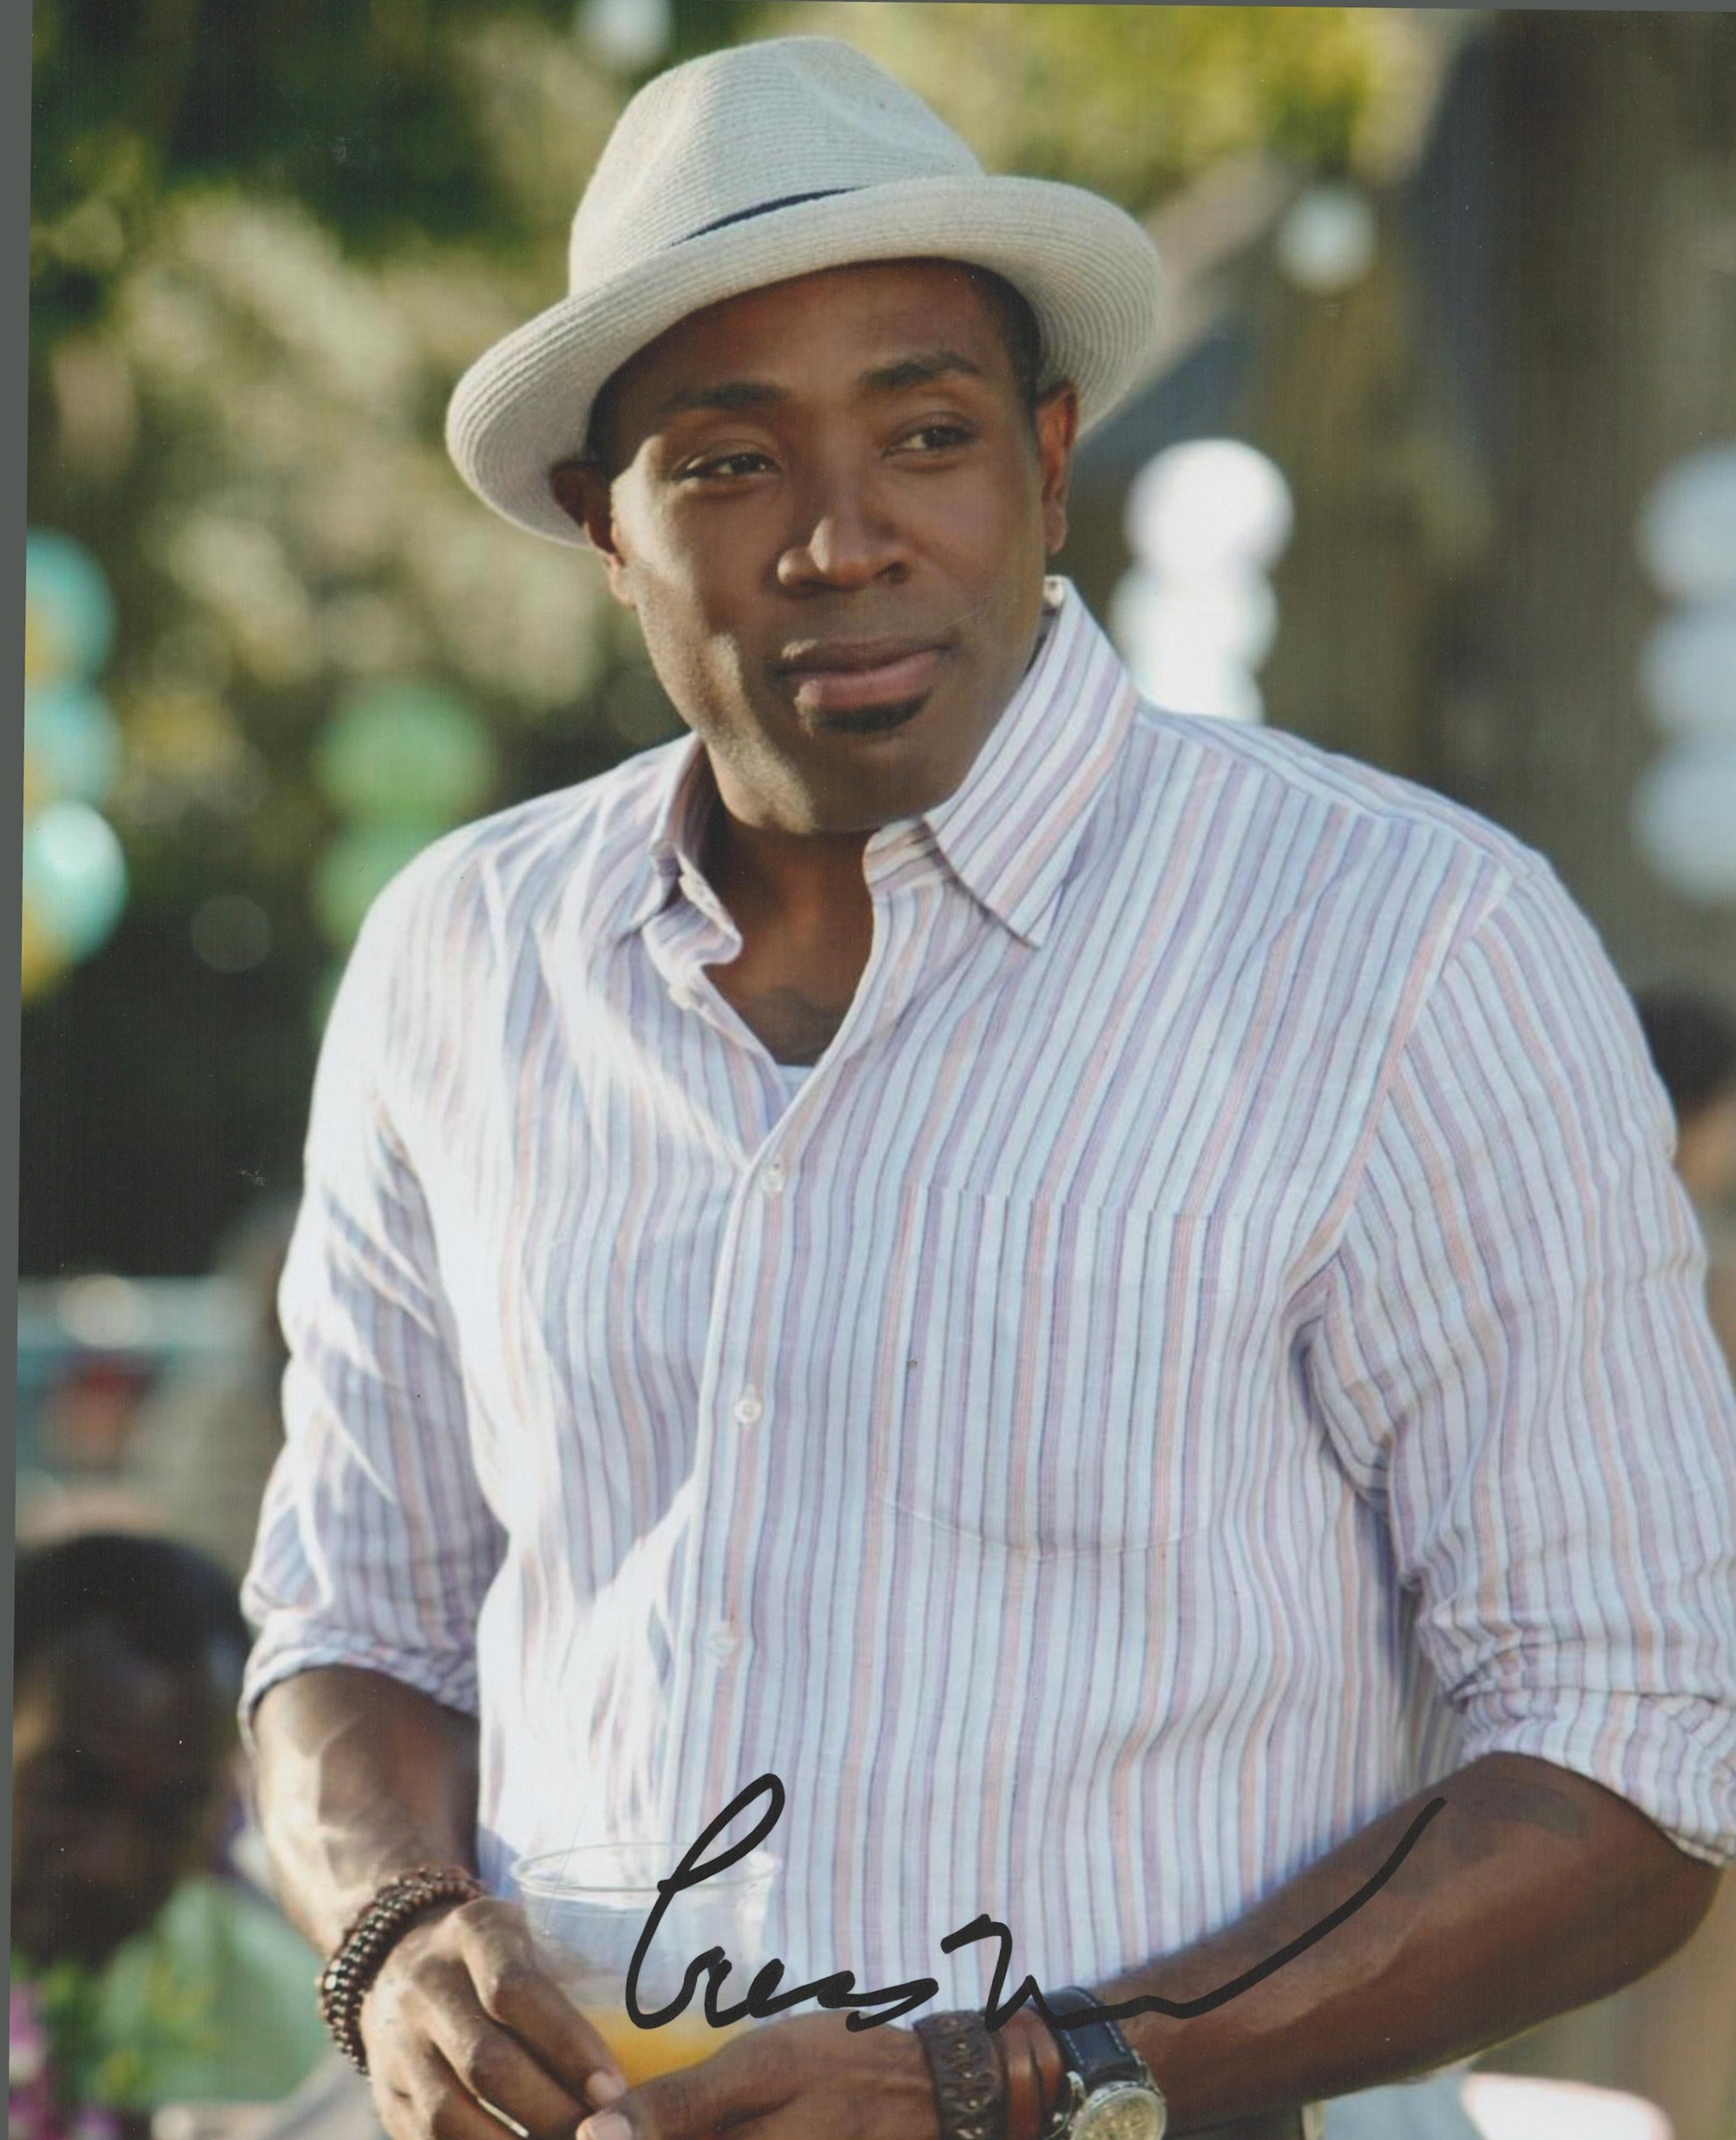 Cress Williams American Actor Best Known In TV Series Prison Break. Signed 10x8 Colour Photo. Good